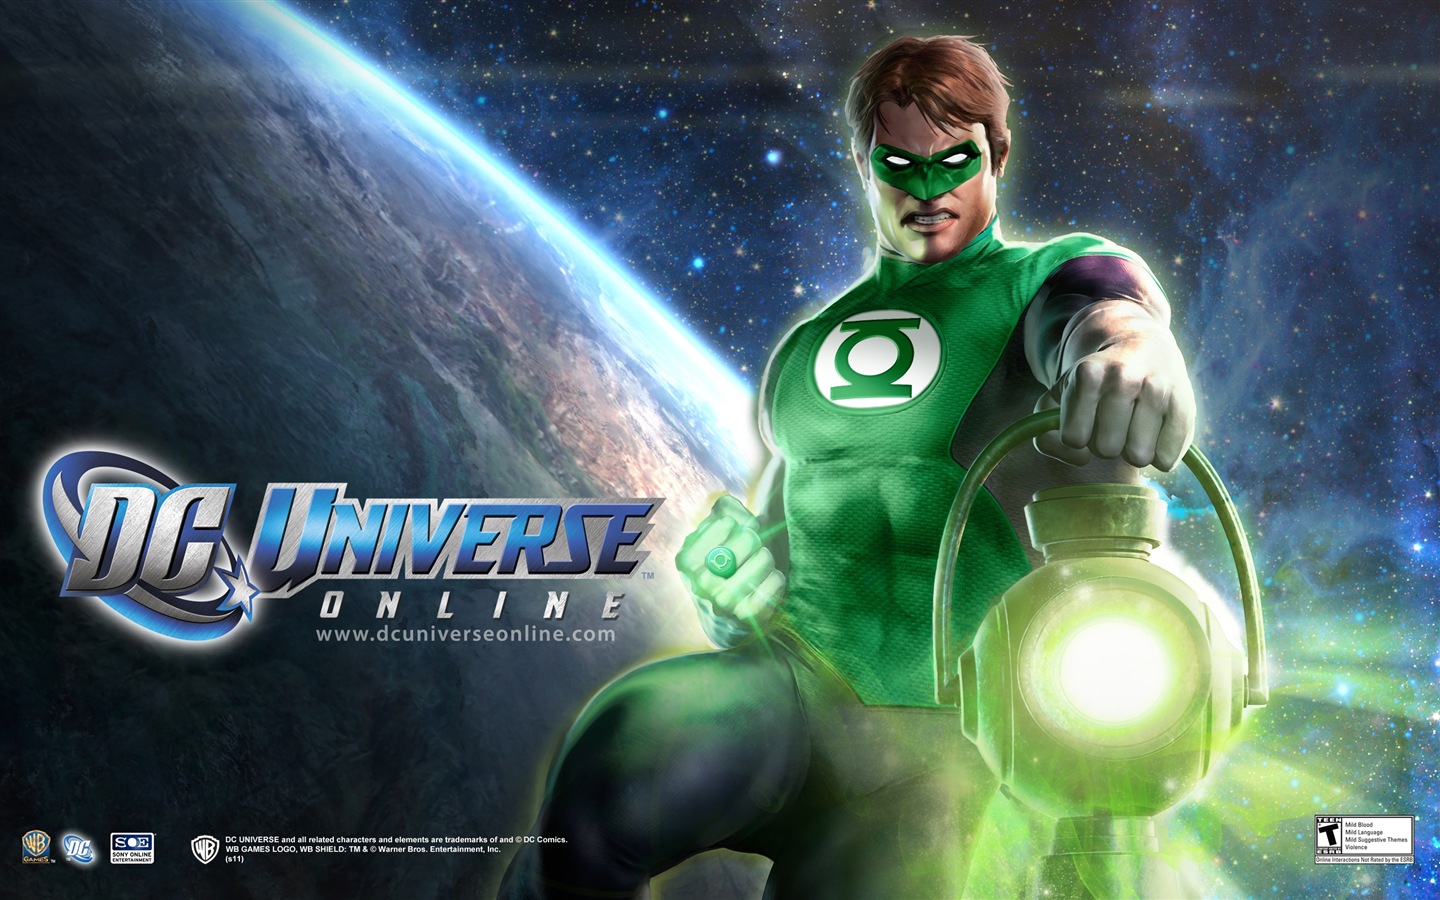 DC Universe Online HD game wallpapers #17 - 1440x900